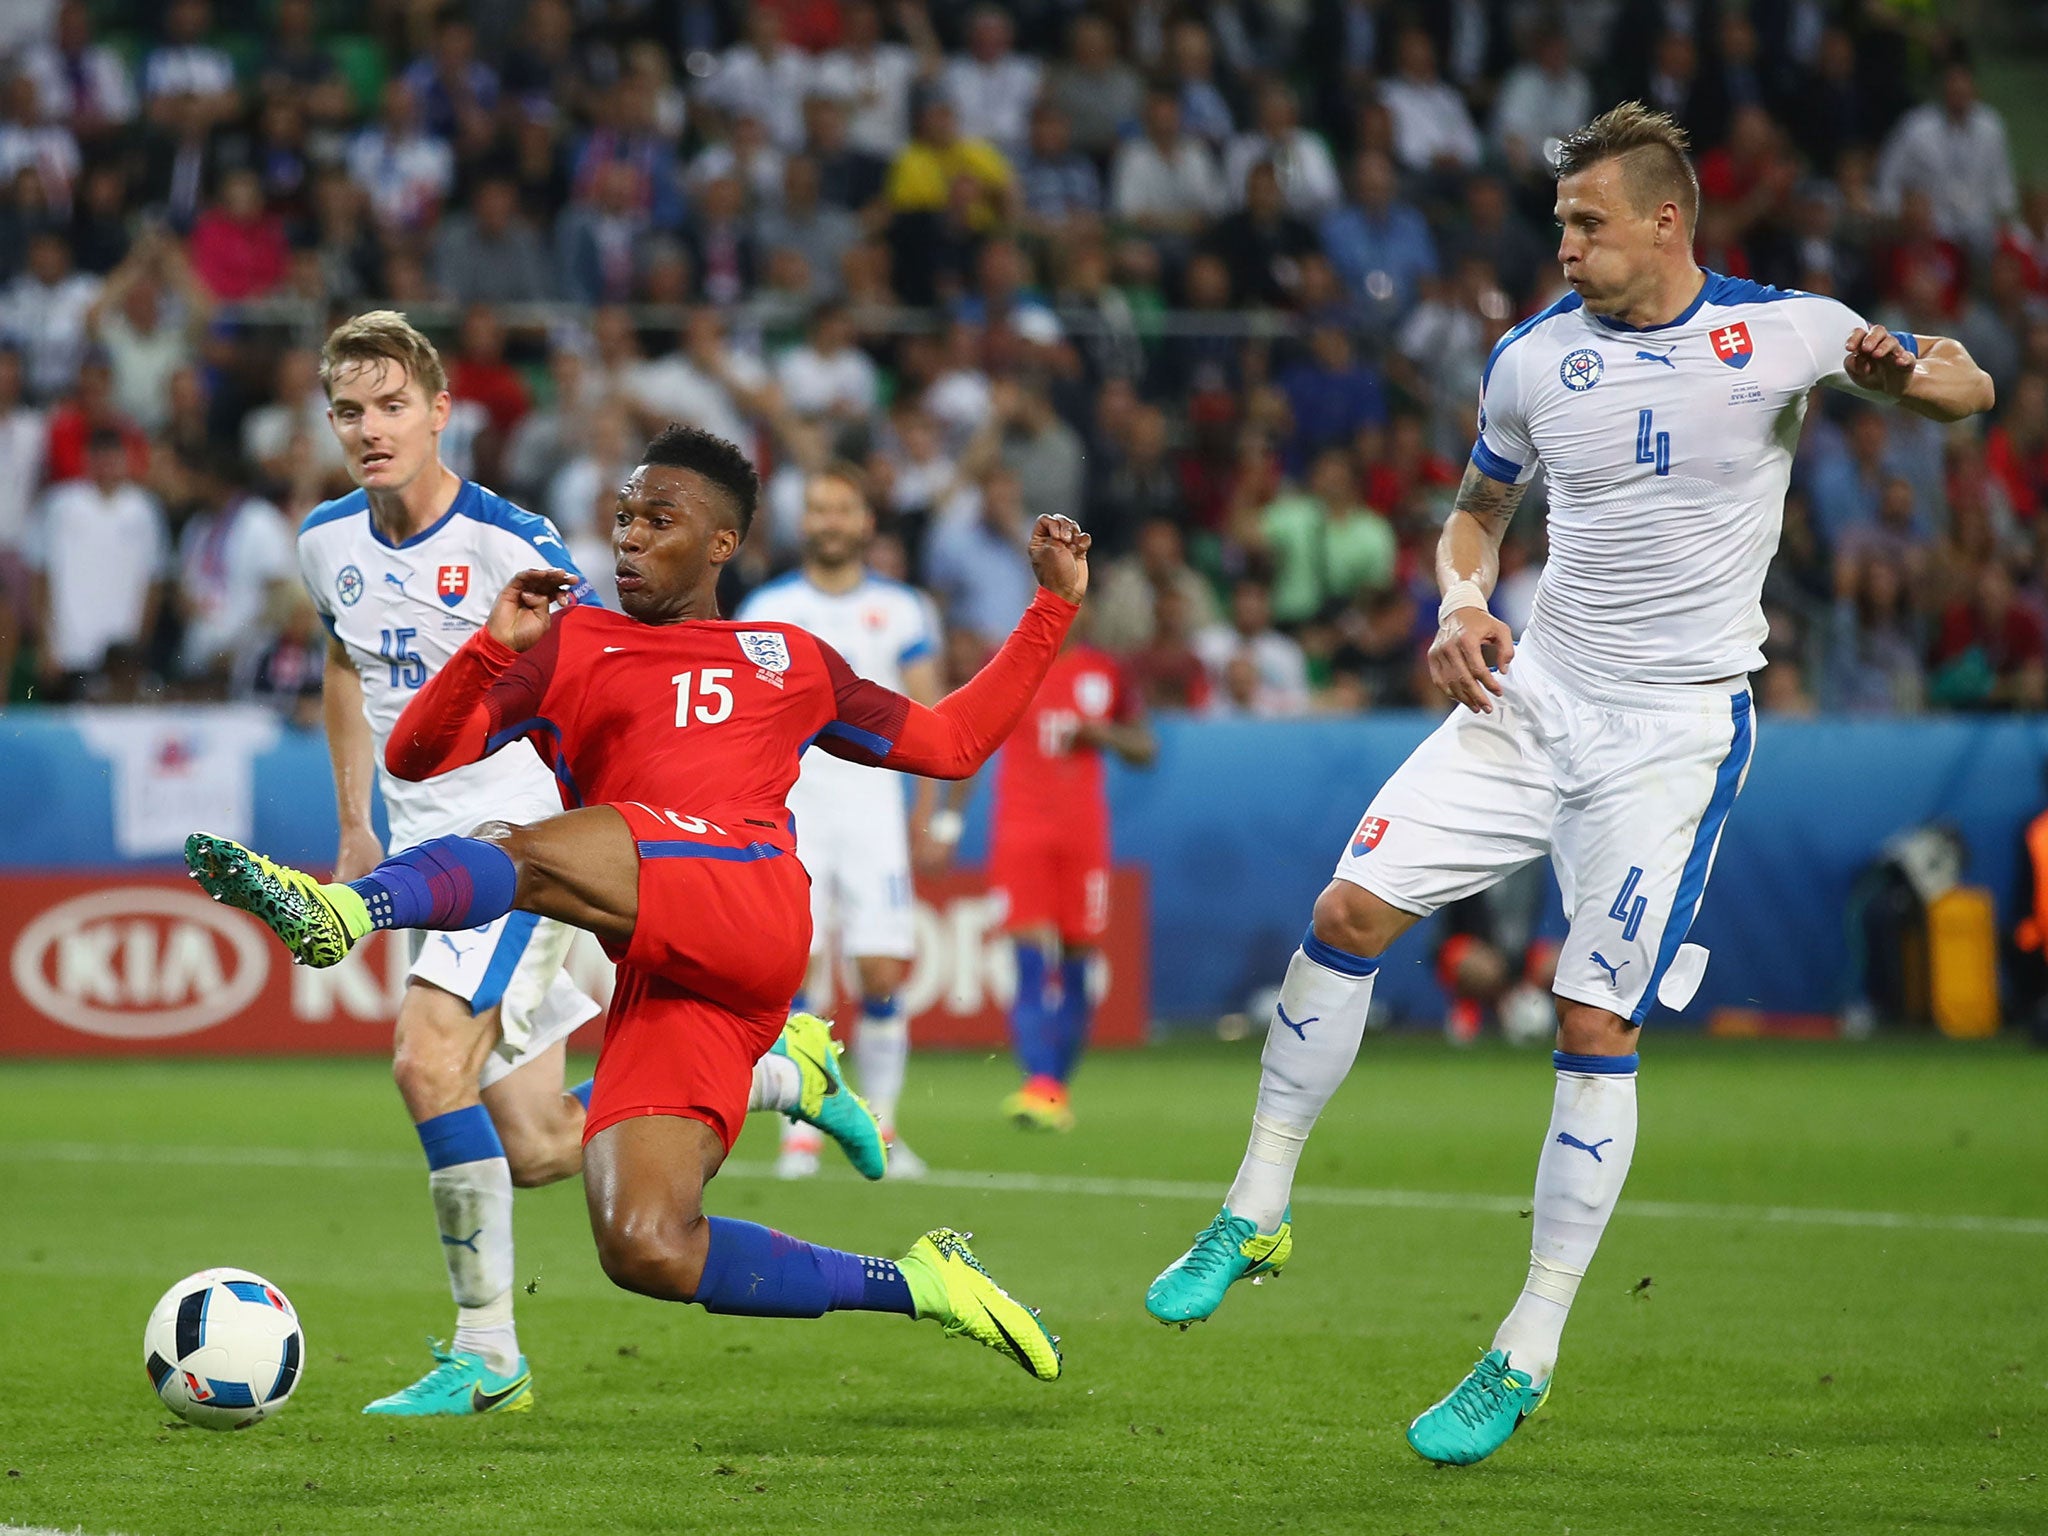 Daniel Sturridge kicks thin air when he should have scored against Slovakia. If only he'd practiced